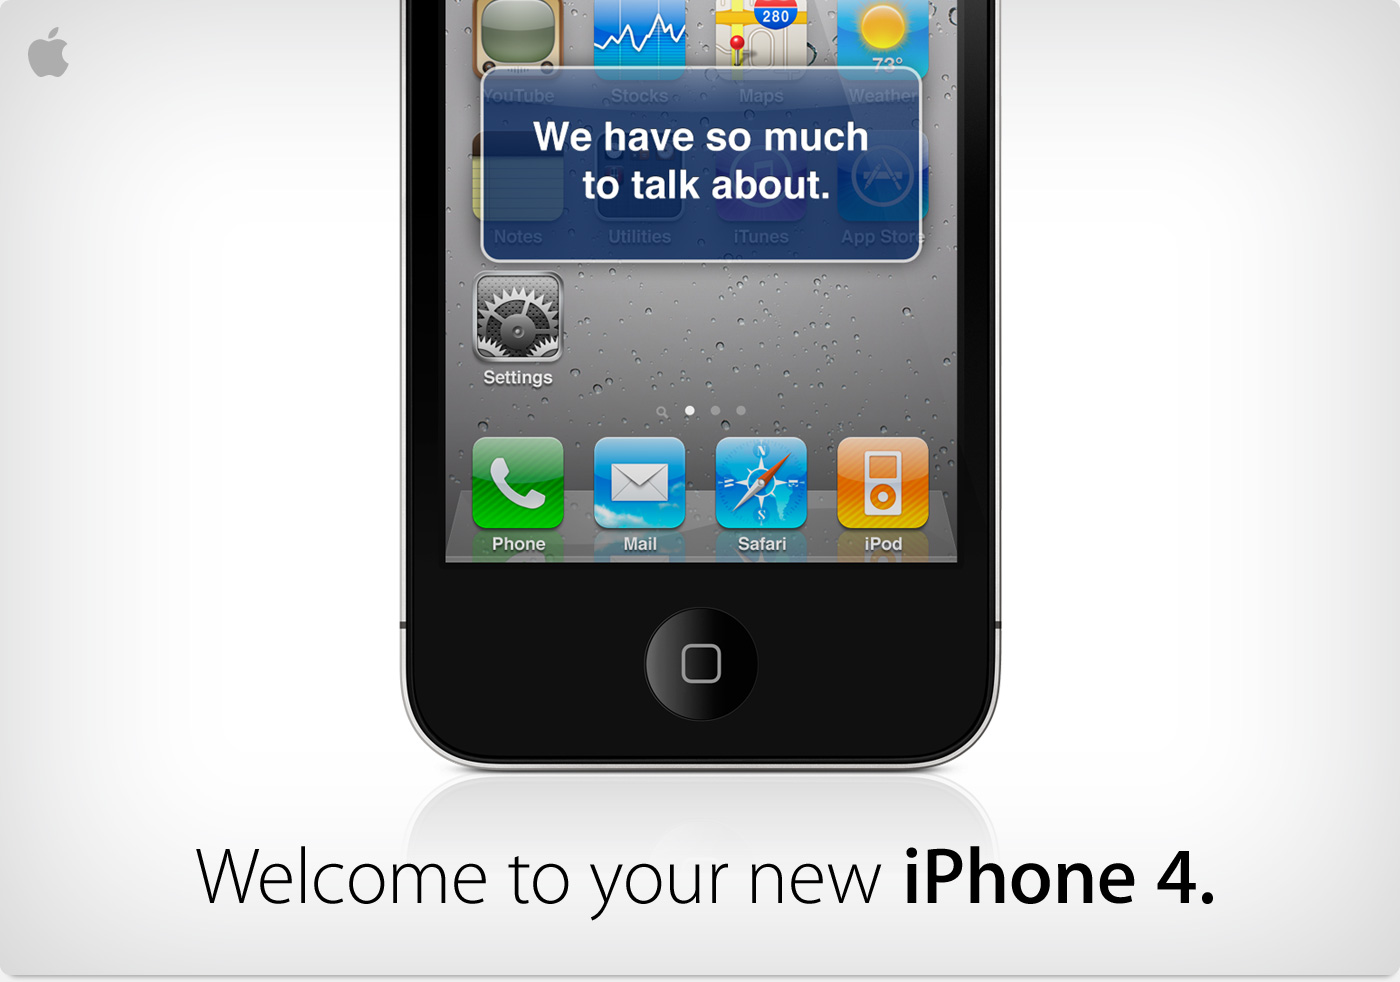 Welcome to your new iPhone 4.